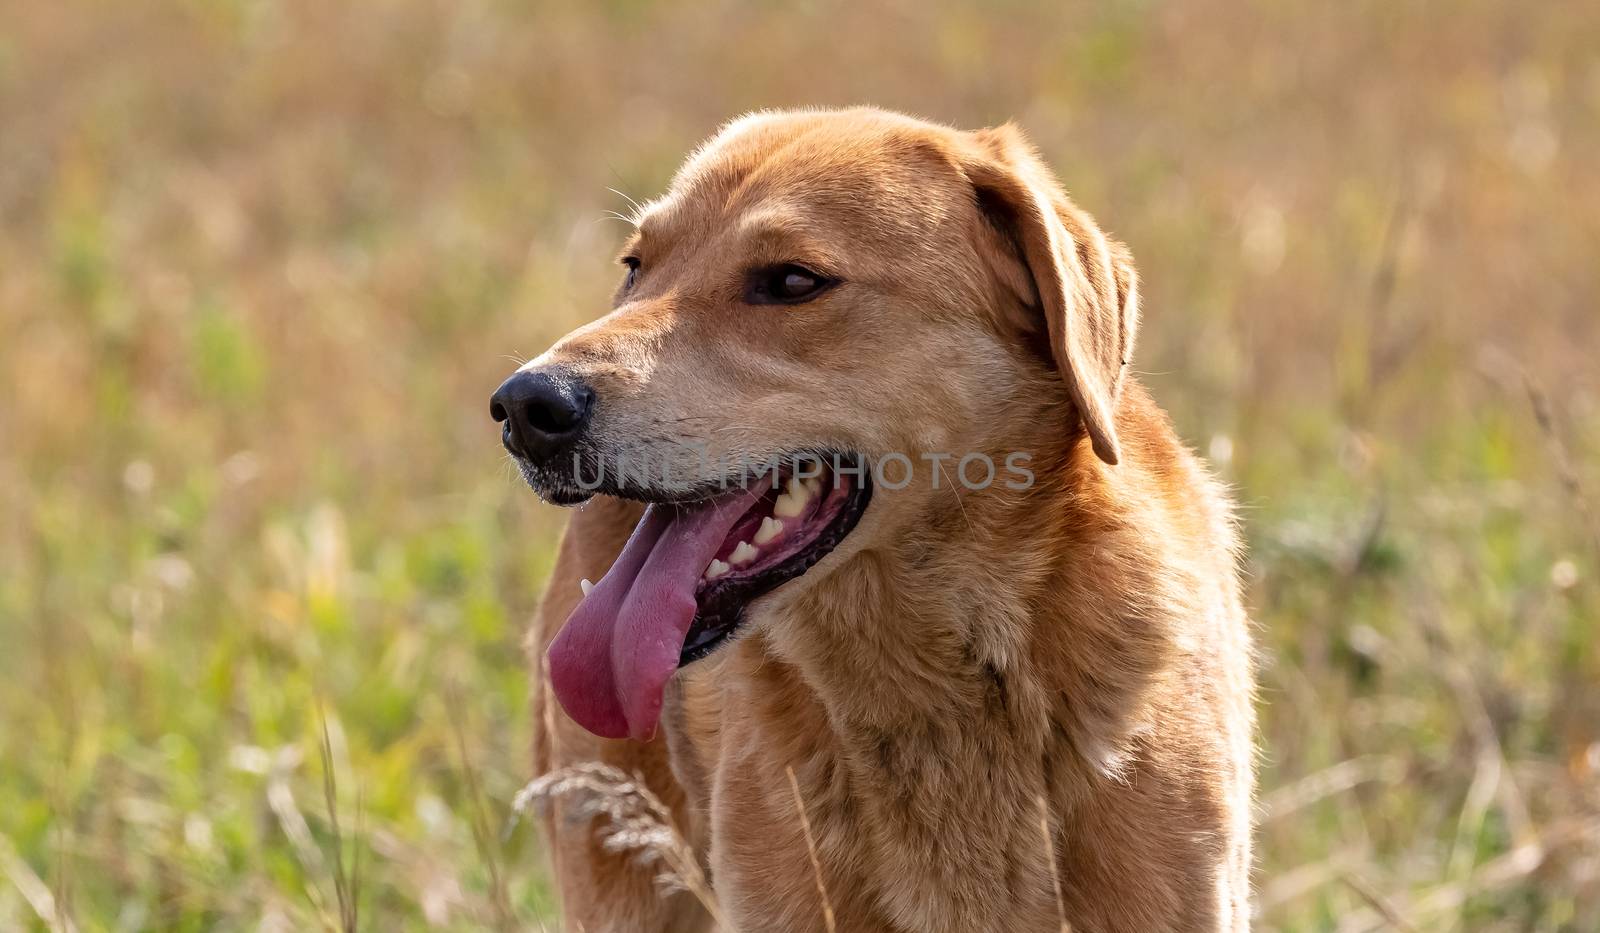 A close up shot of a brown hound dog hunting on a meadow blurred background. Dog looking curiously in the distance.